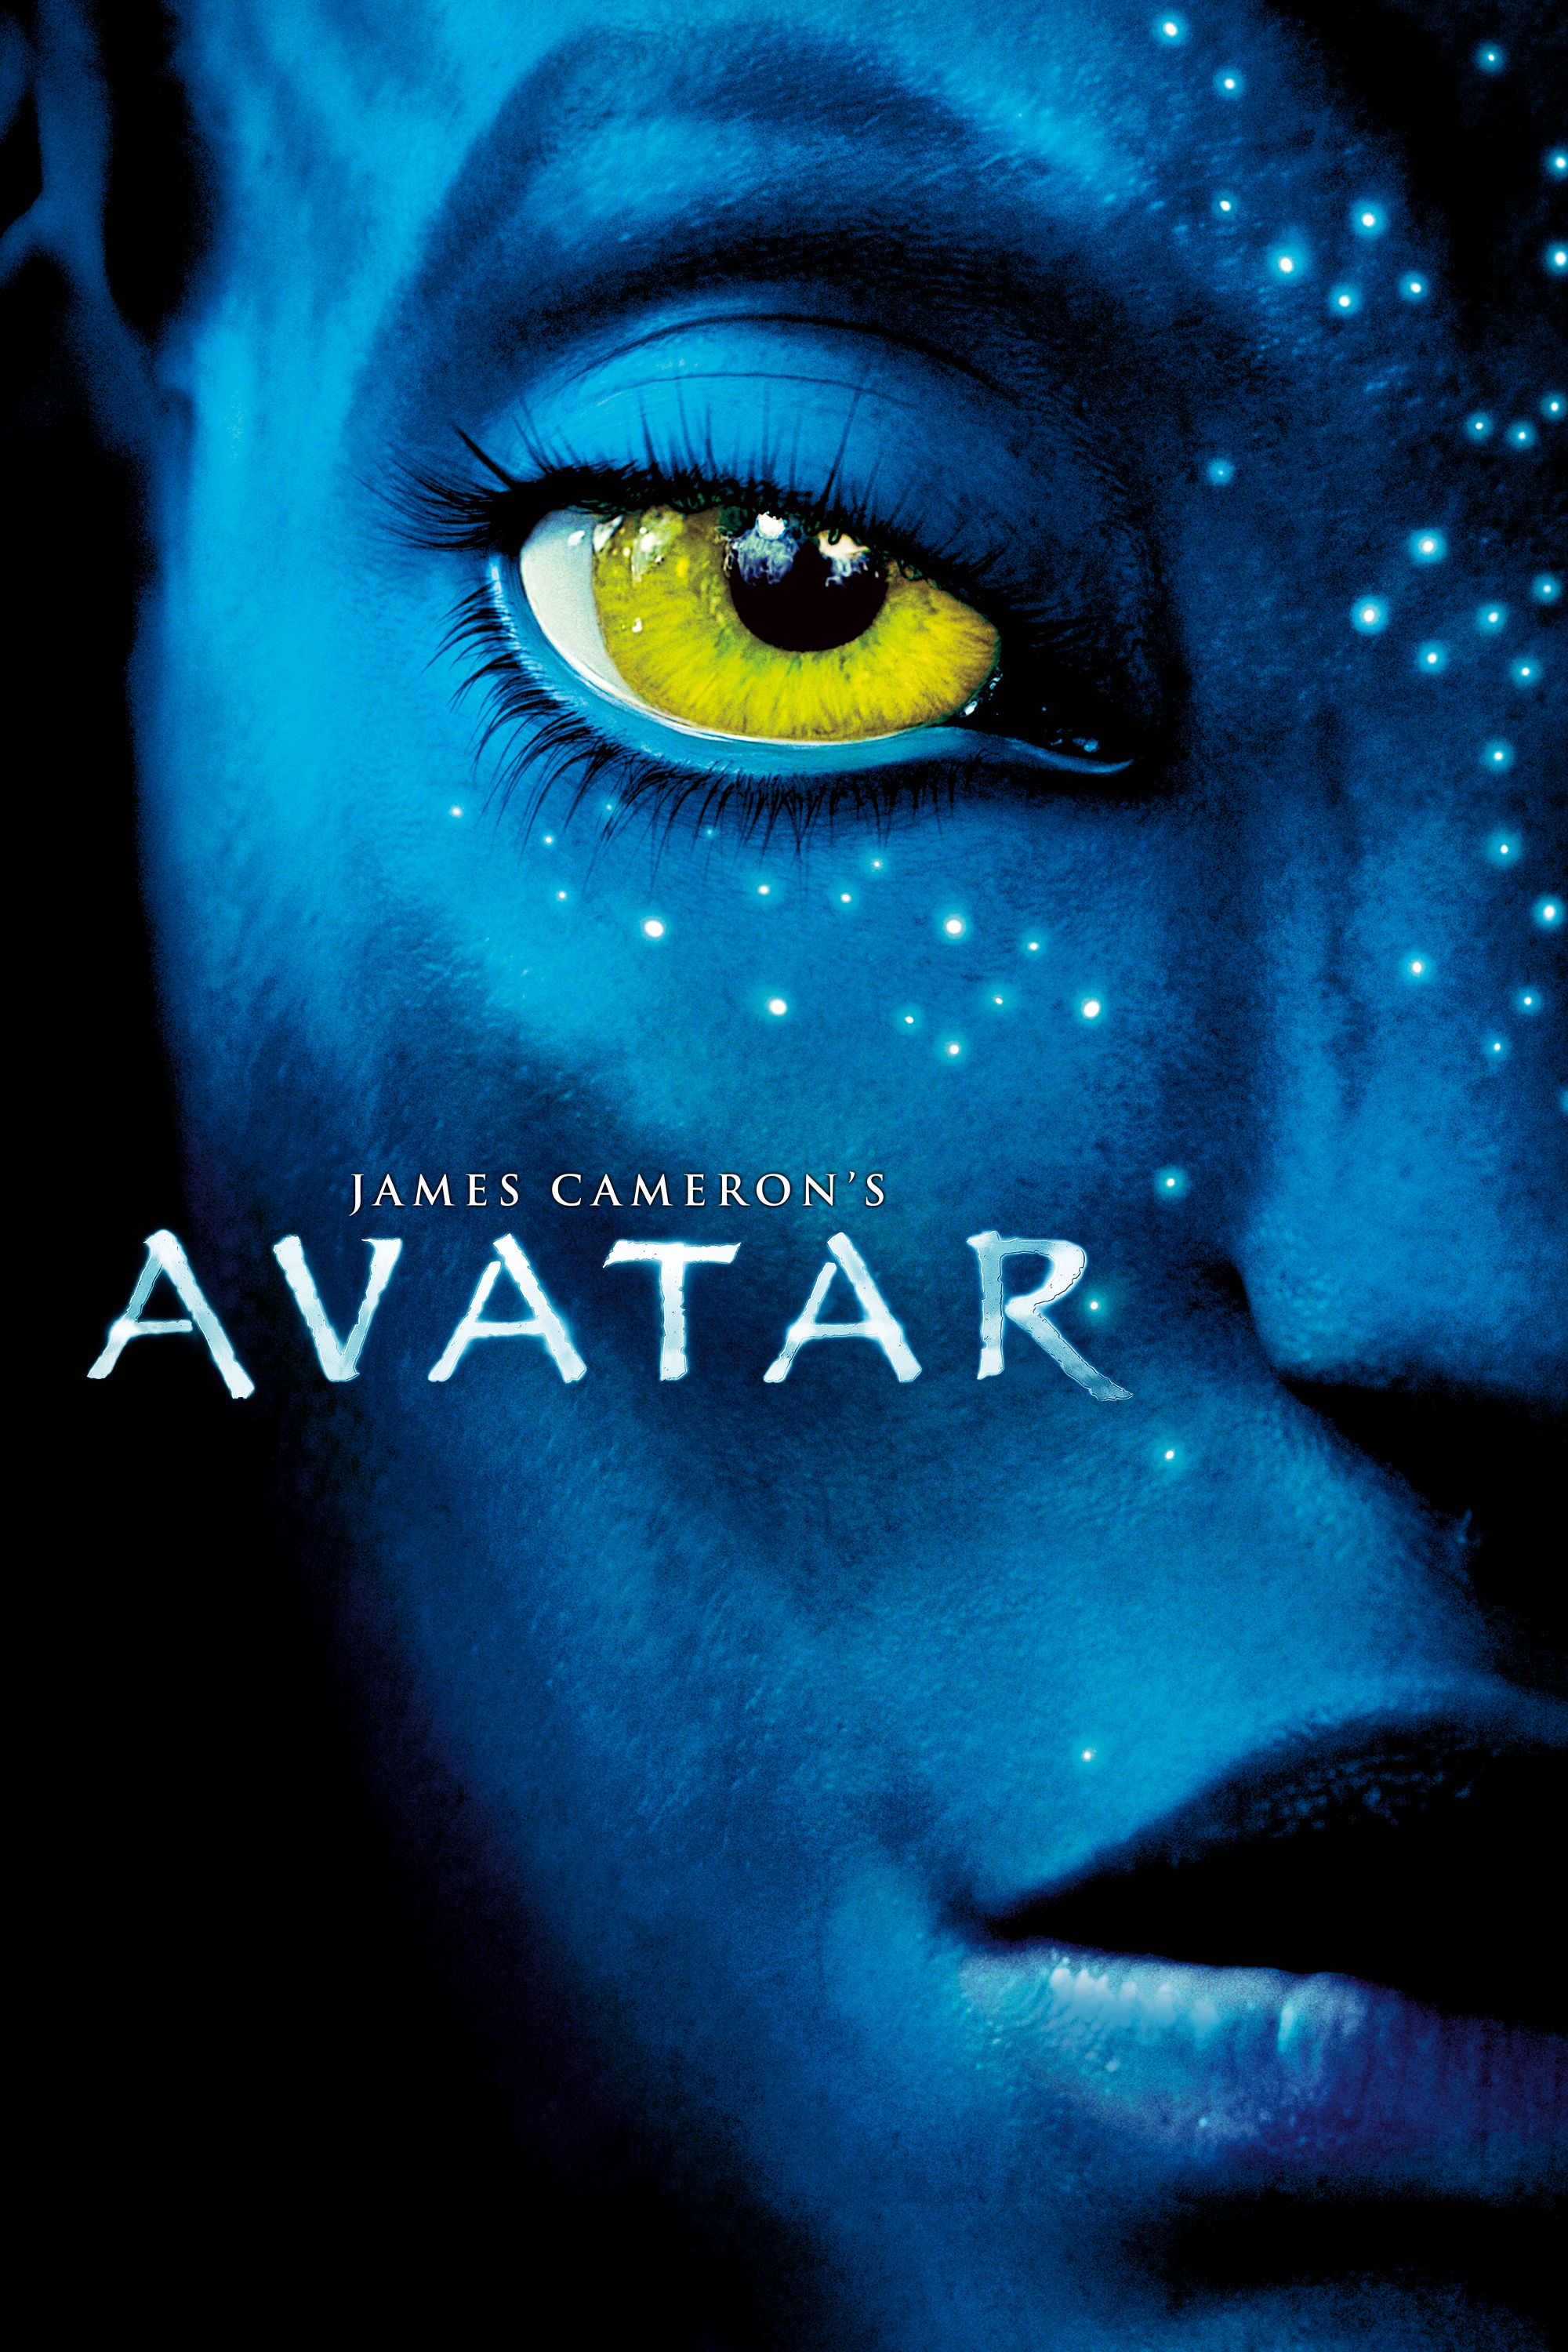 Avatar 3 Full Movie  Hollywood Full Movie 2023  Full Movies in English  𝐅𝐮𝐥𝐥 𝐇𝐃 1080 from 3d hollywood movies hindi Watch Video  HiFiMovco